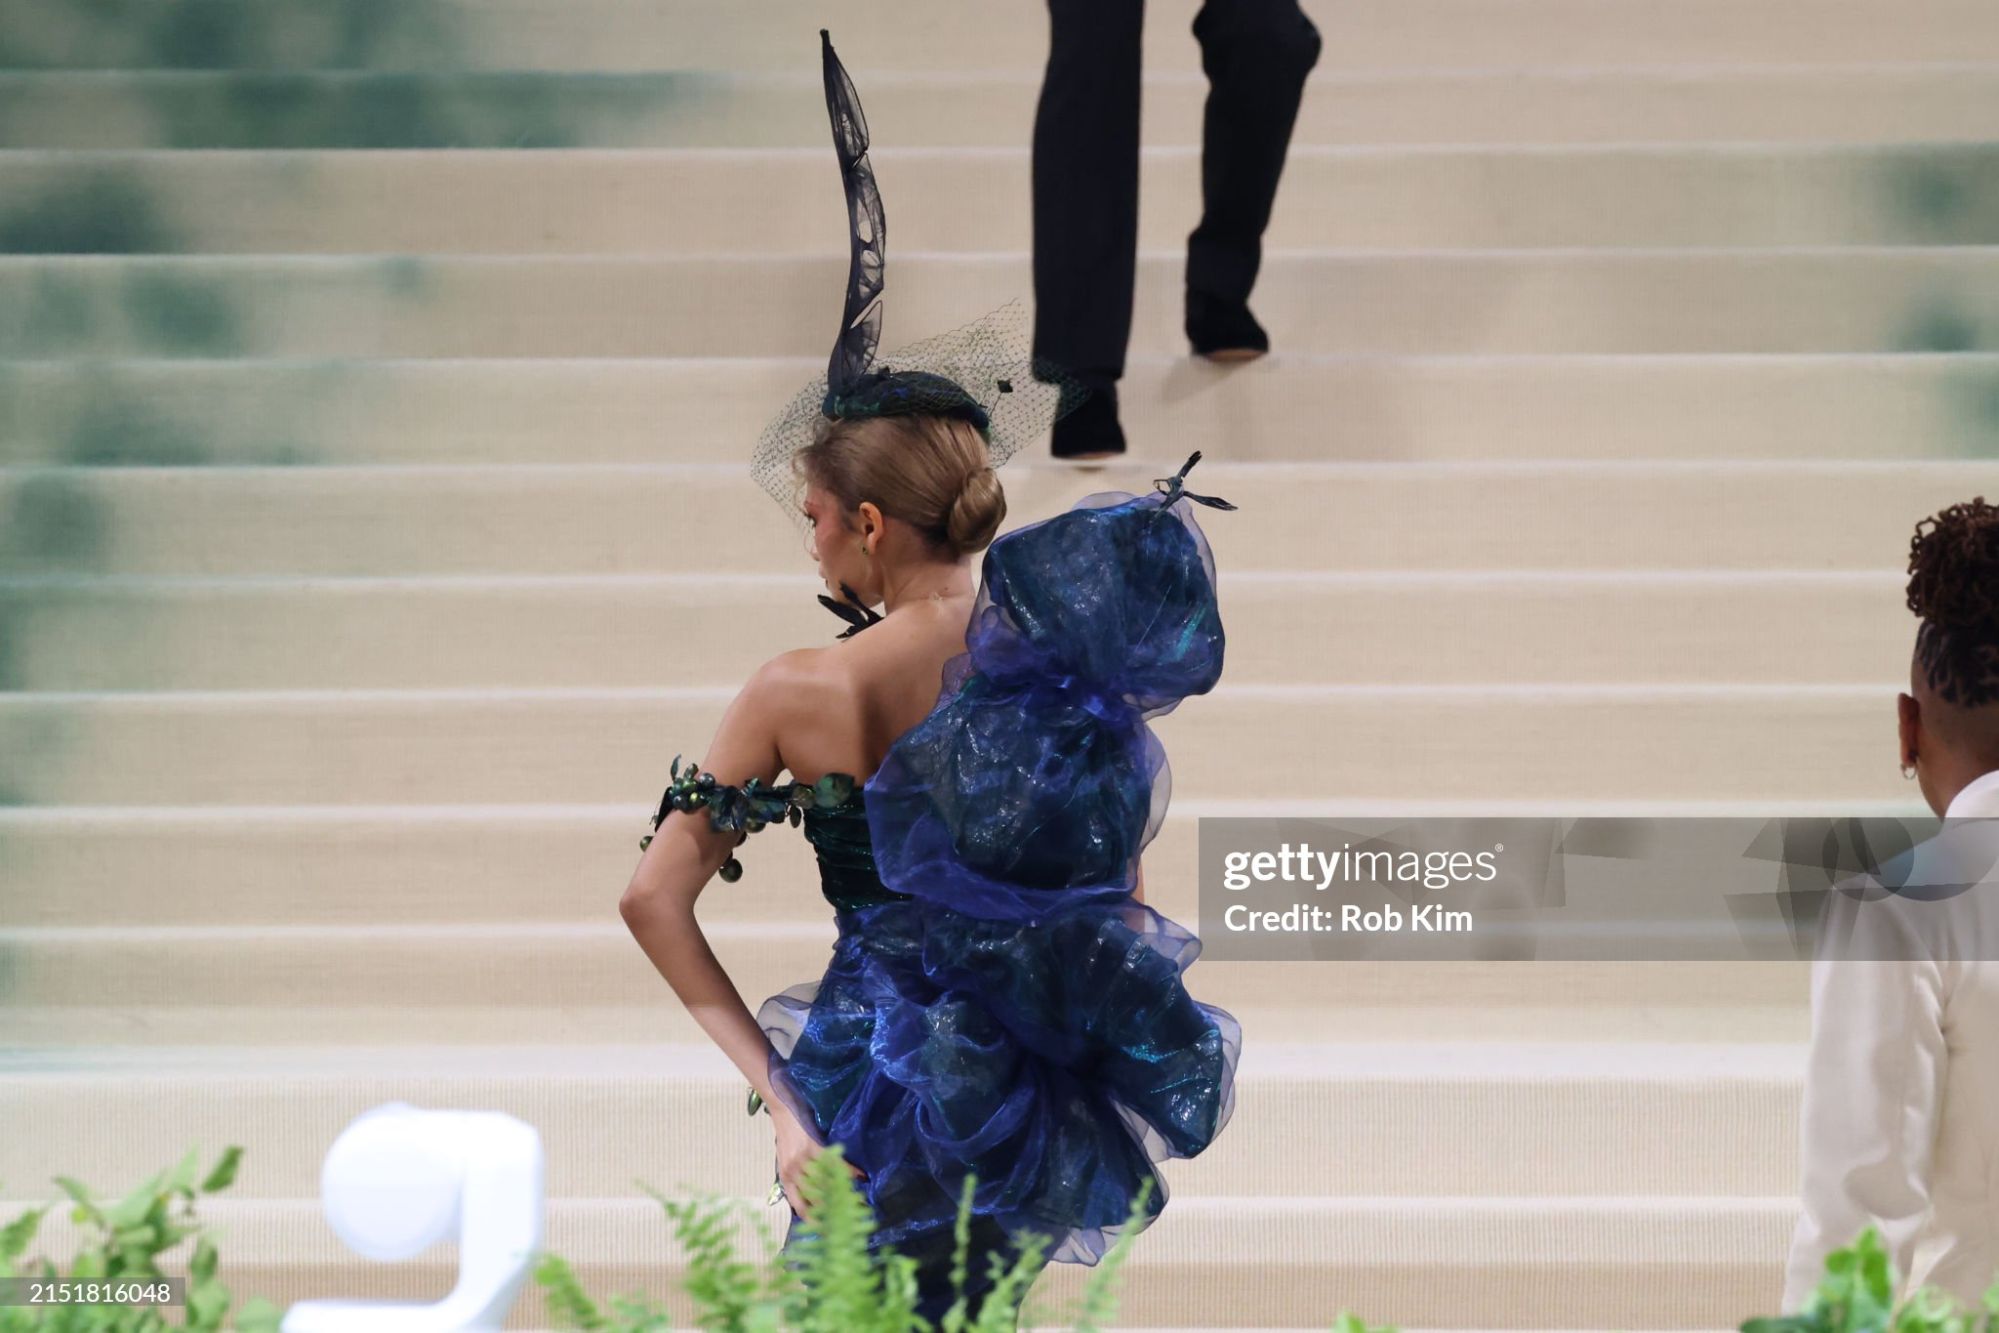 gettyimages-2151816048-2048x2048.jpg